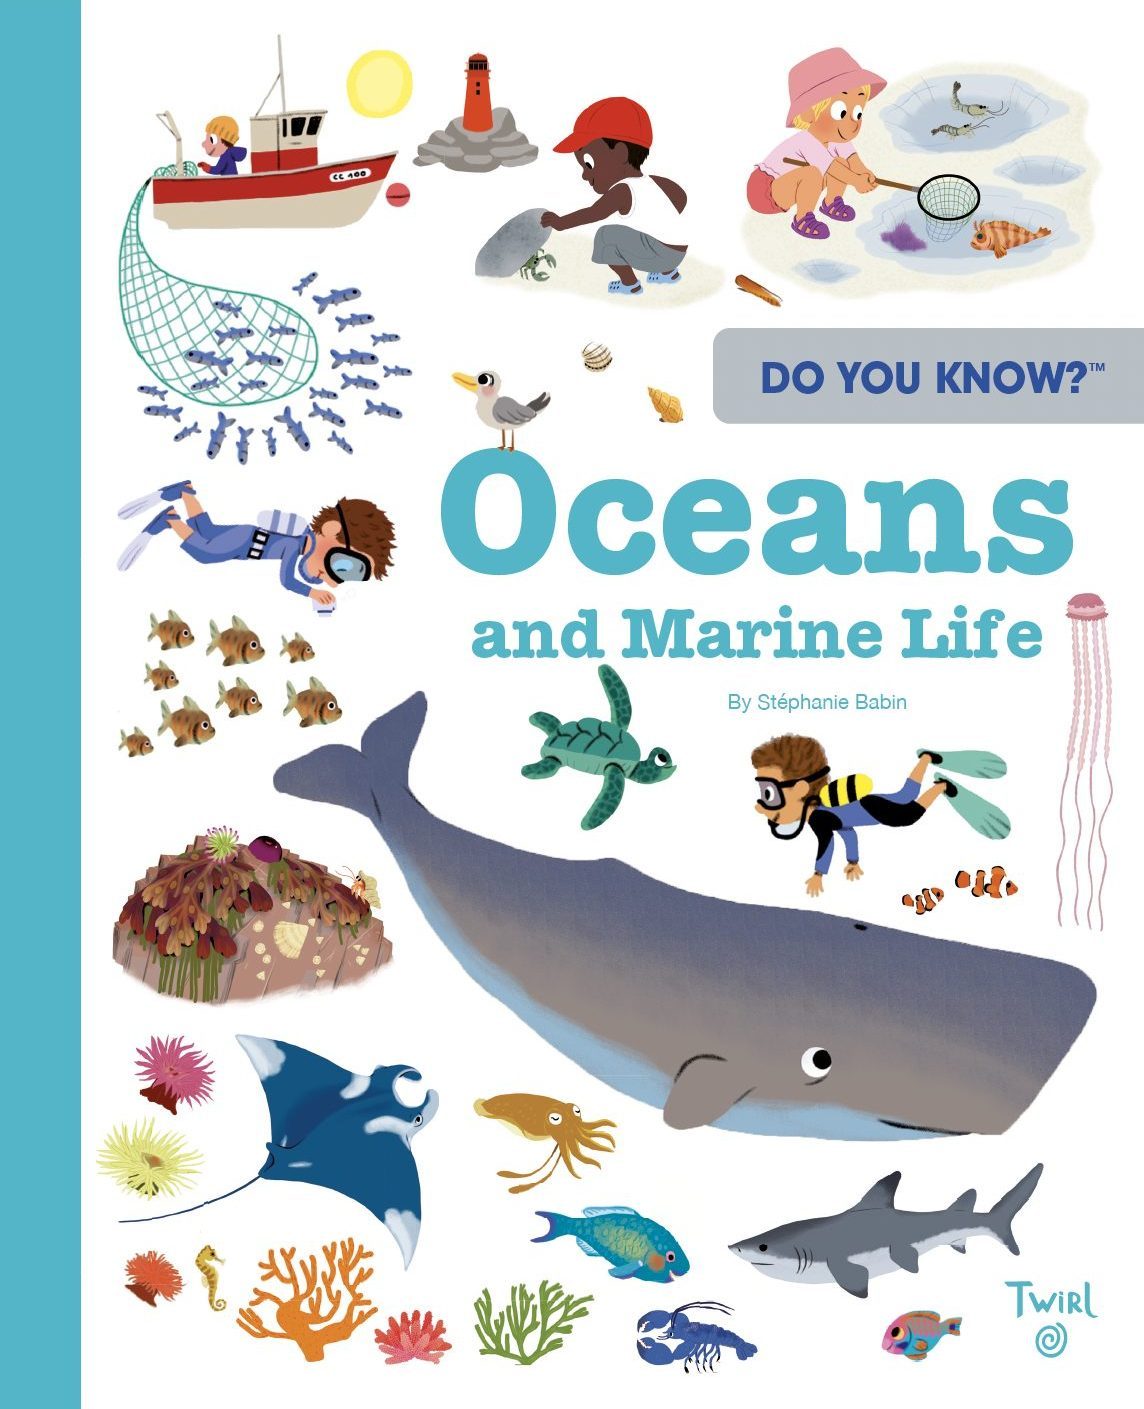 Cover image of "Do You Know? Oceans and Marine Life," an illustrated nonfiction book by Stéphanie Babin